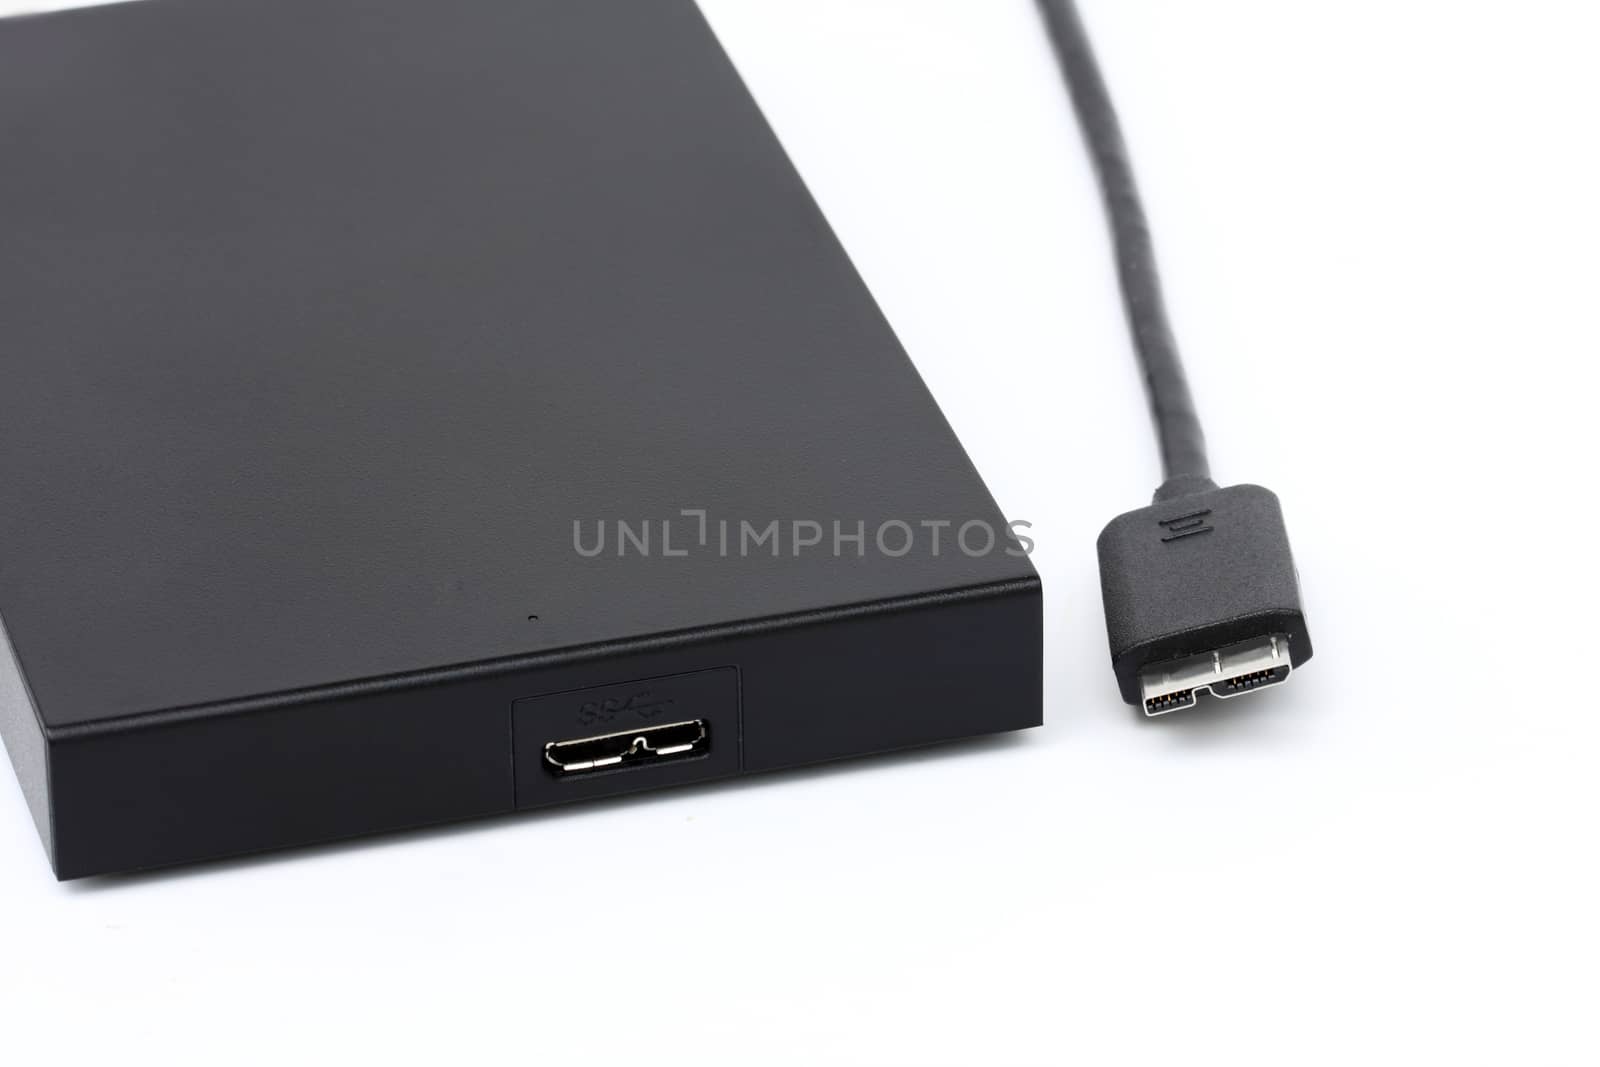 USB cable isolated and port external Harddisk on white background